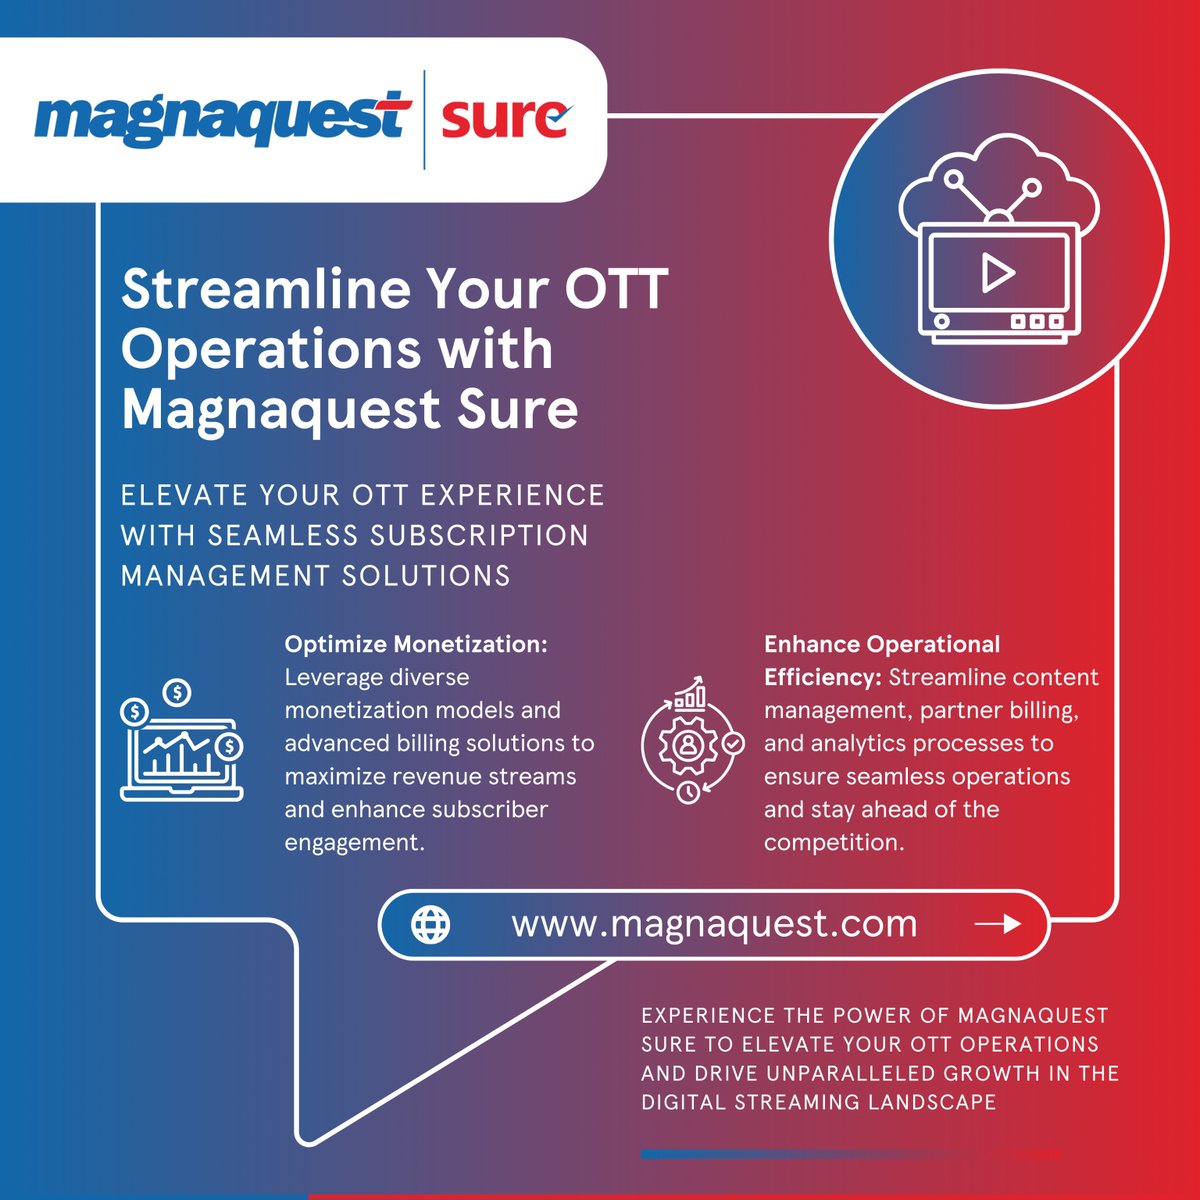 With @Magnaquest #Sure, you'll unlock a comprehensive suite of tools designed to streamline your operations, from simplifying #monetization strategies to ensuring seamless #subscriptionbilling processes. Discover a #value-driven #OTT solution for online #contentdelivery.